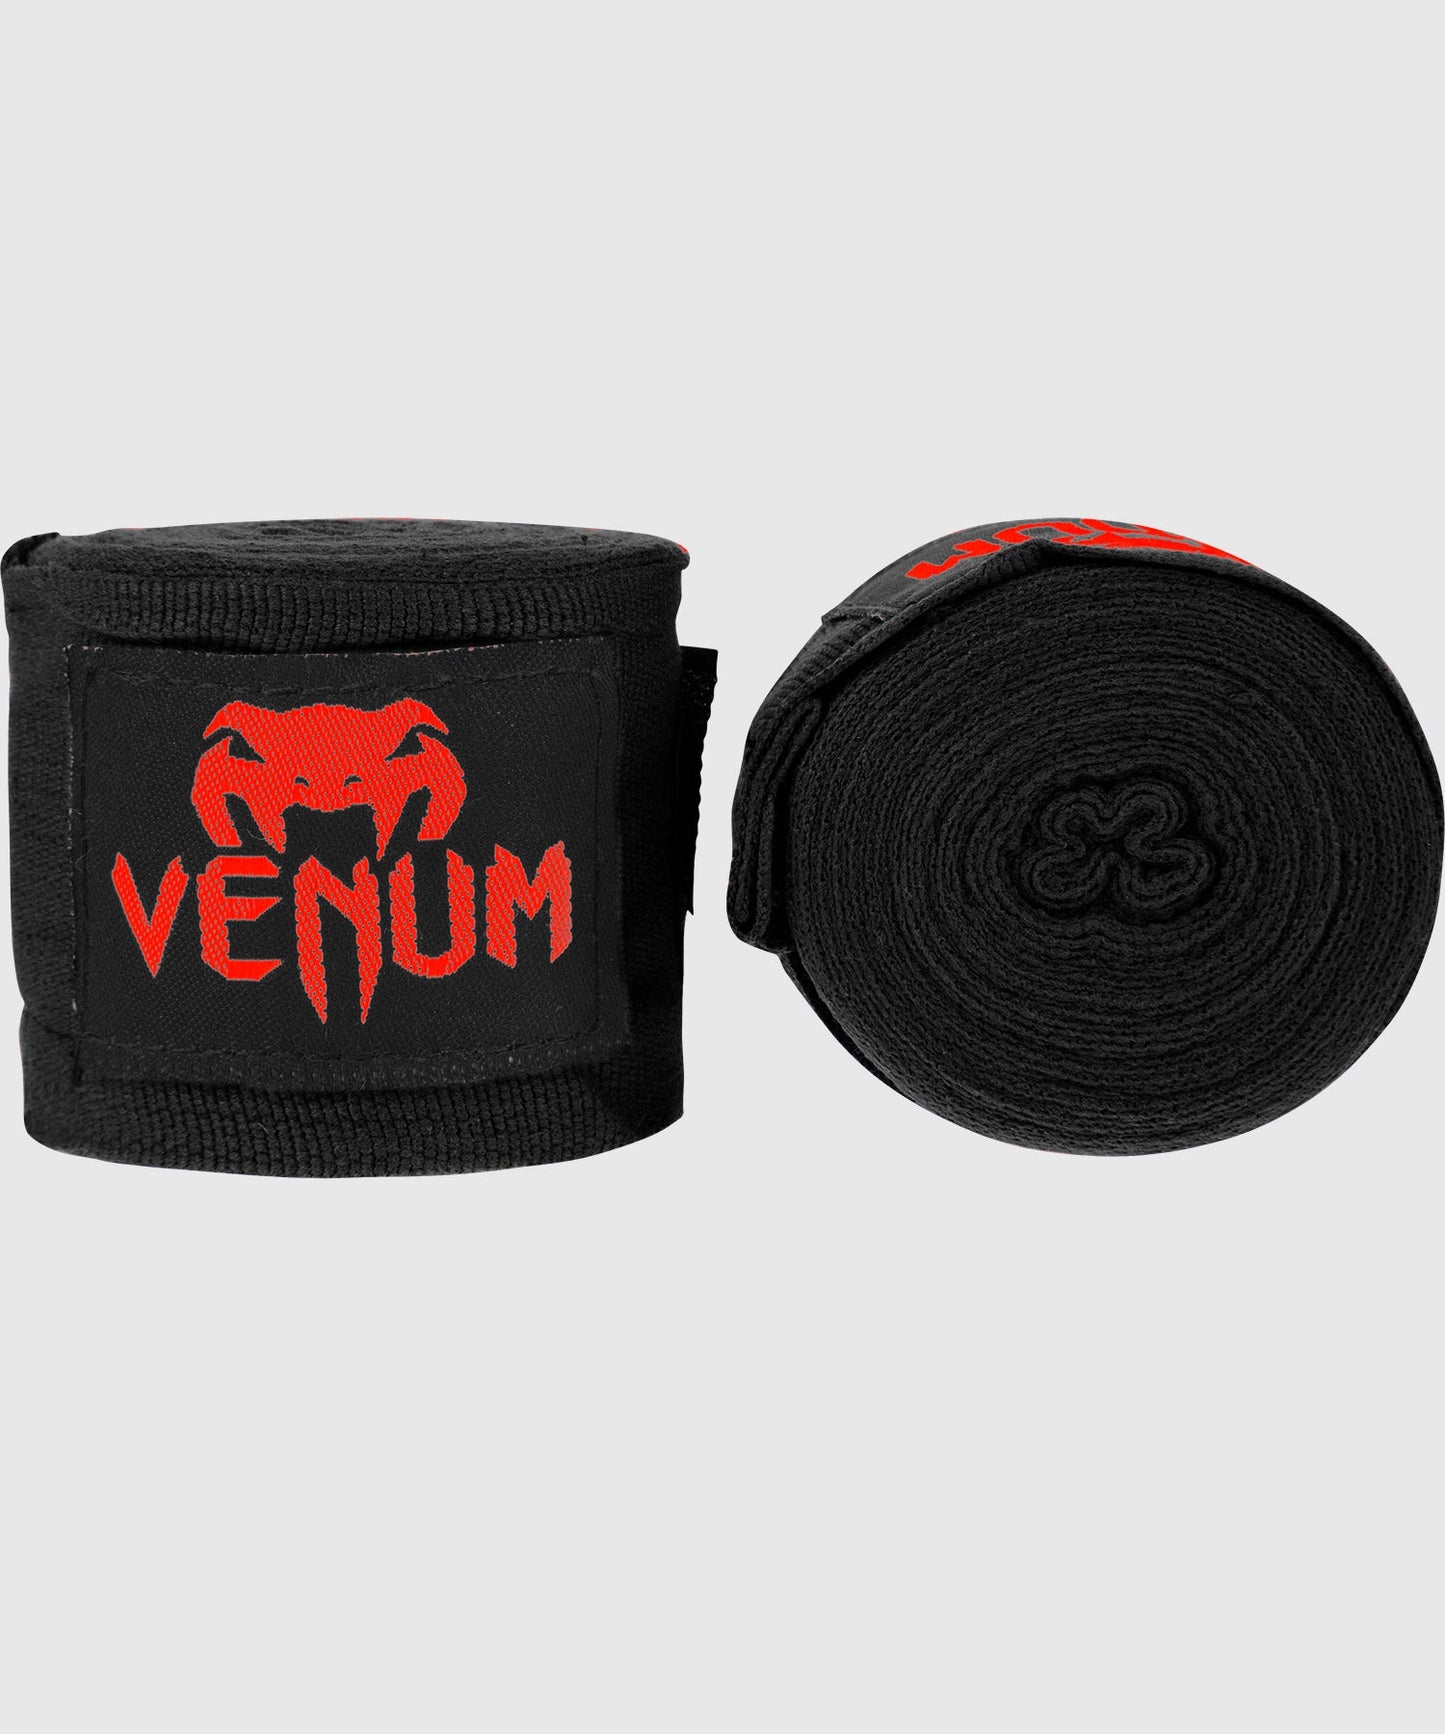 Venum Kontact Boxing Hand Wraps - Black/Red - 98 in